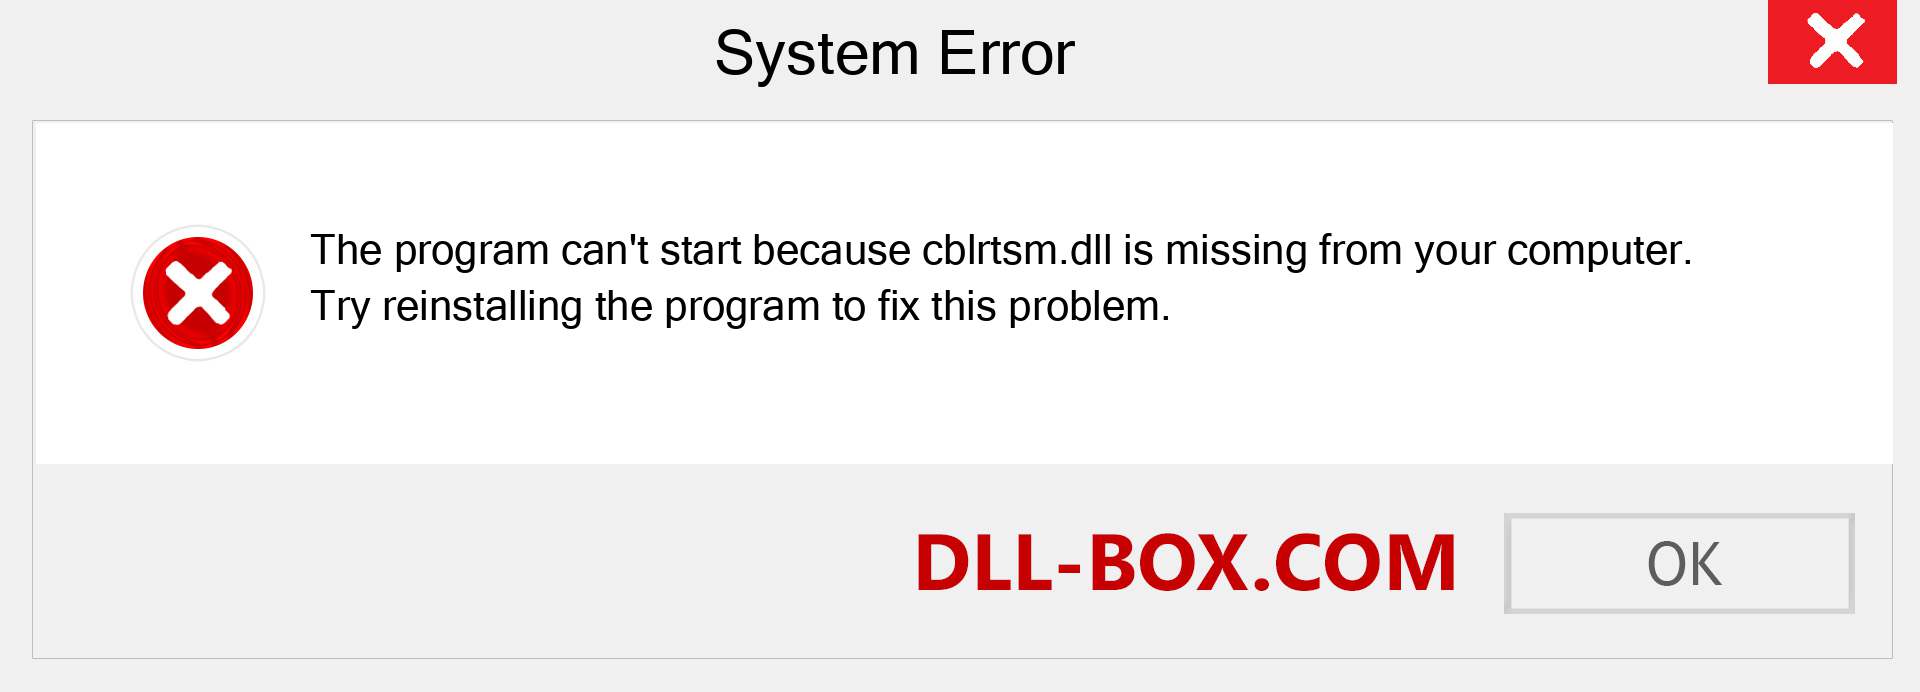  cblrtsm.dll file is missing?. Download for Windows 7, 8, 10 - Fix  cblrtsm dll Missing Error on Windows, photos, images